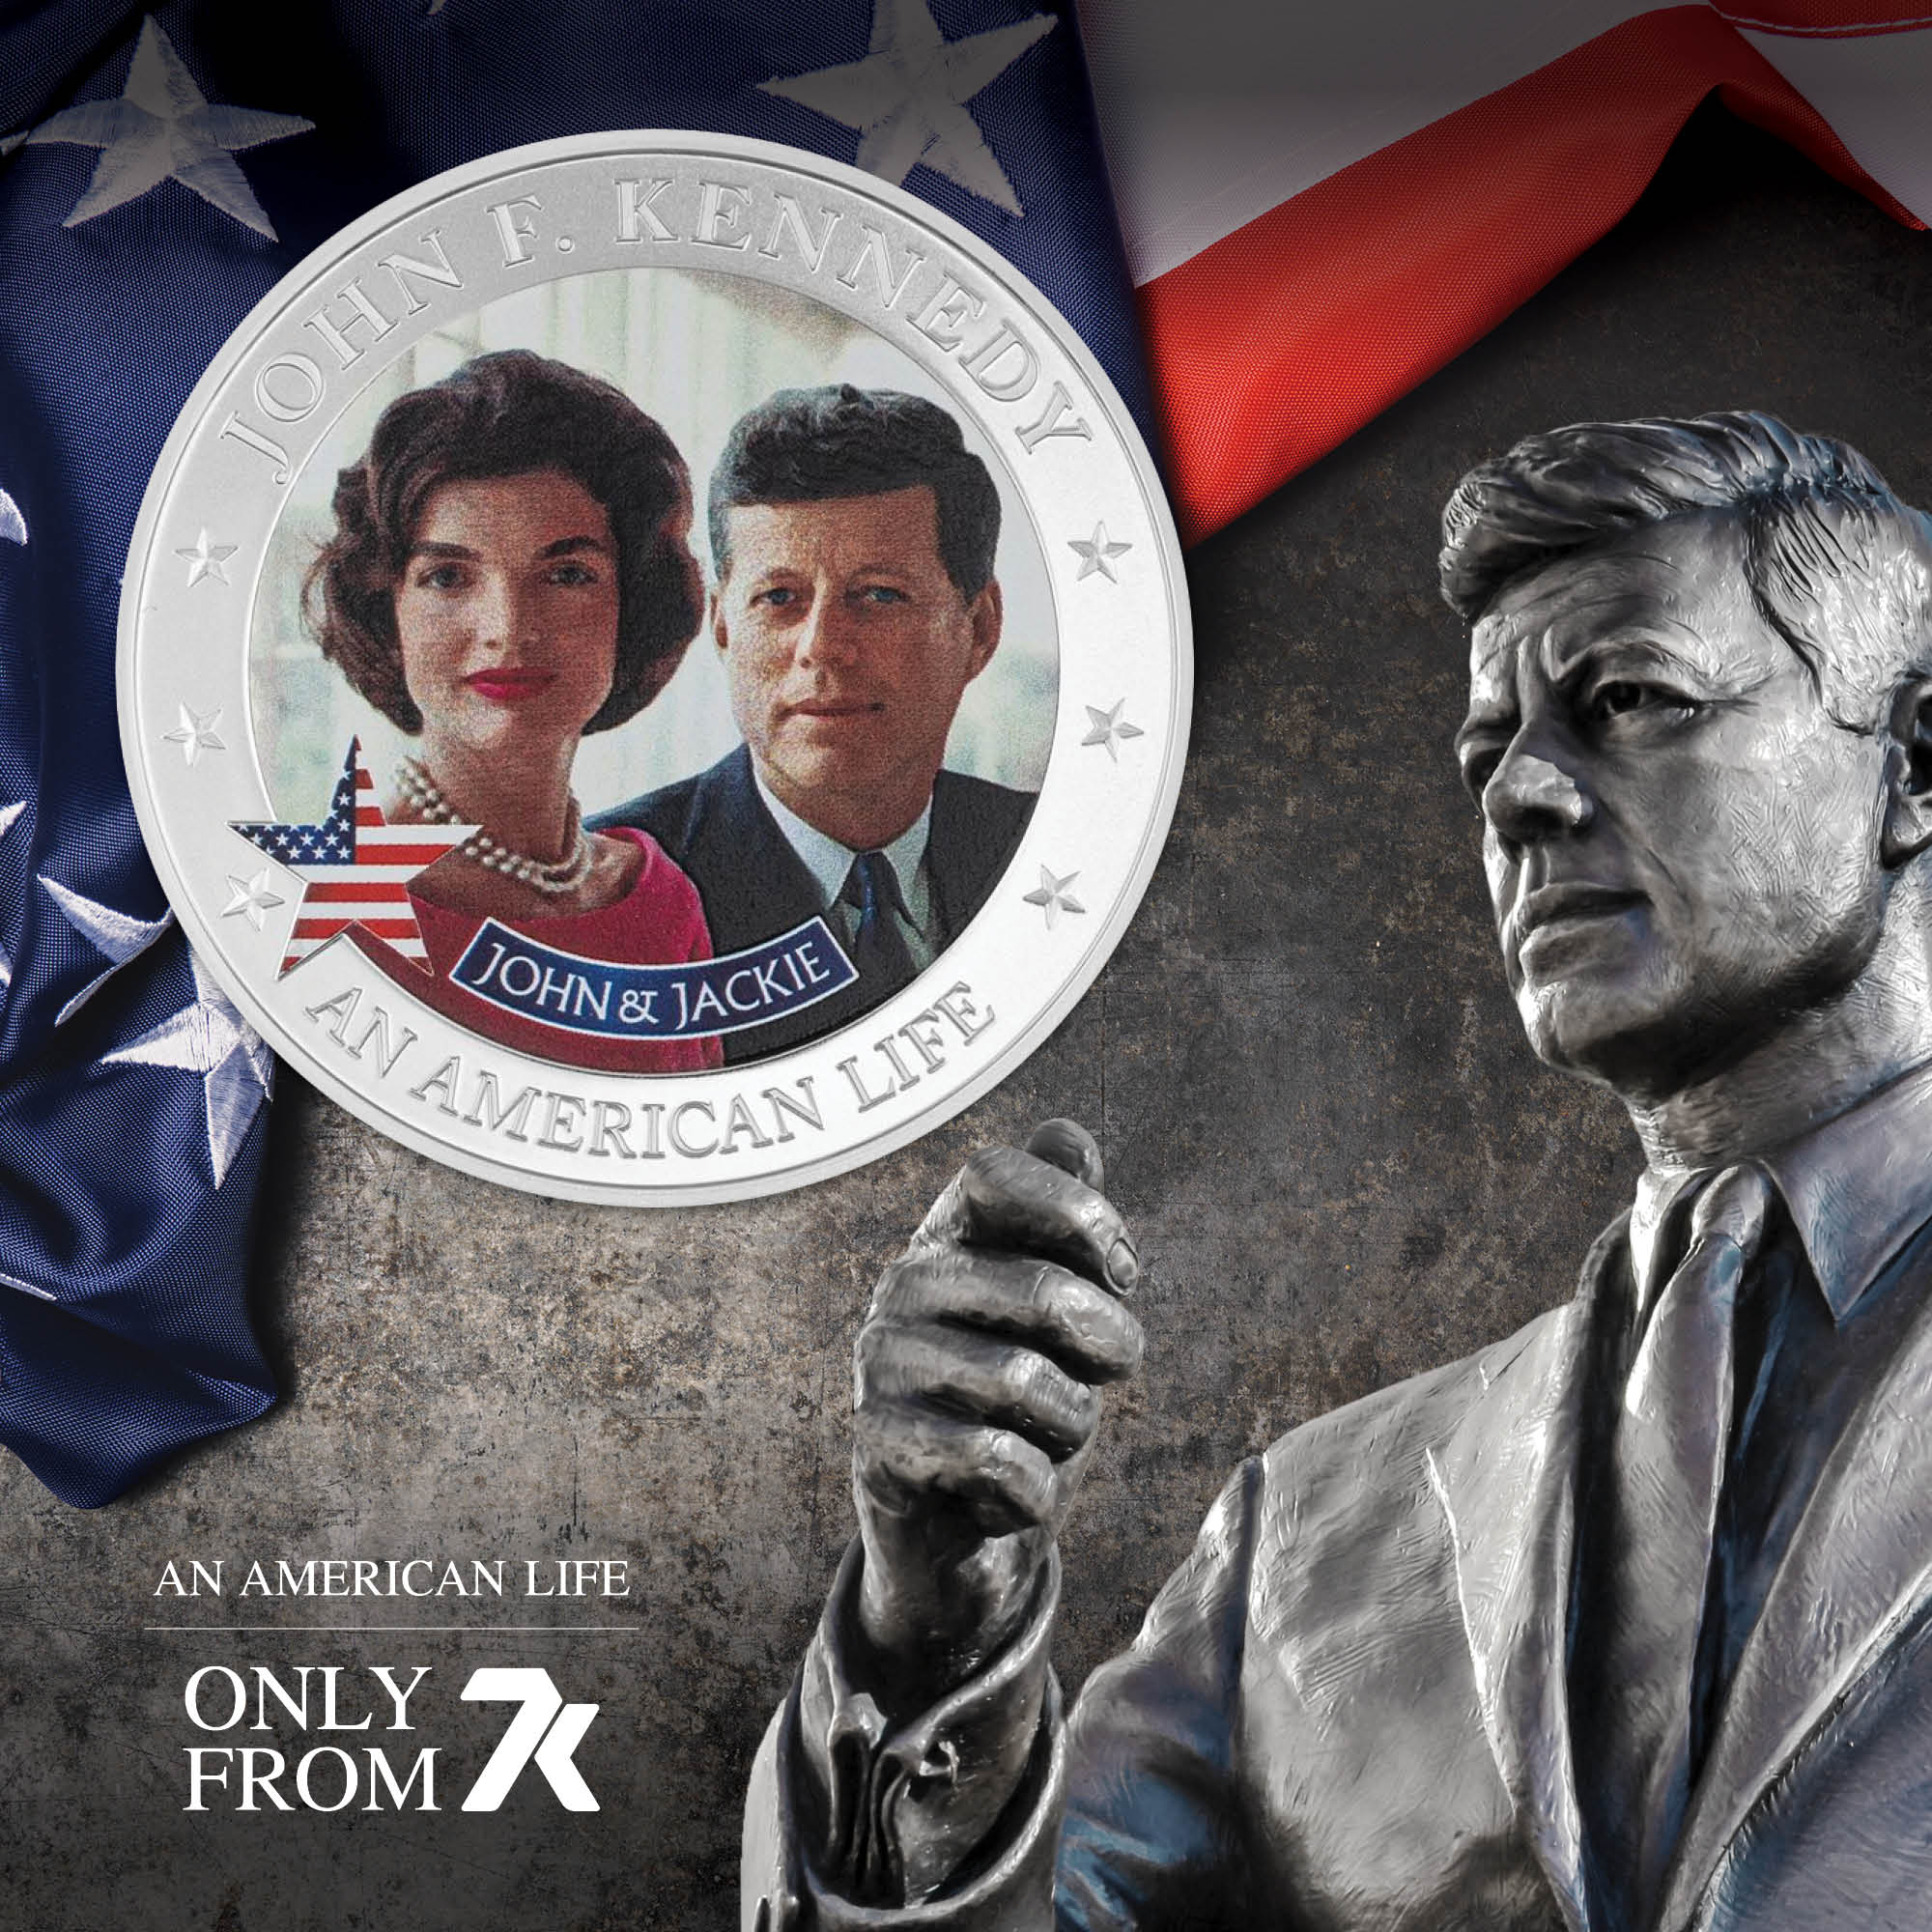 2023 Life Of Kennedy John & Jackie 1/2 oz Silver Coin 